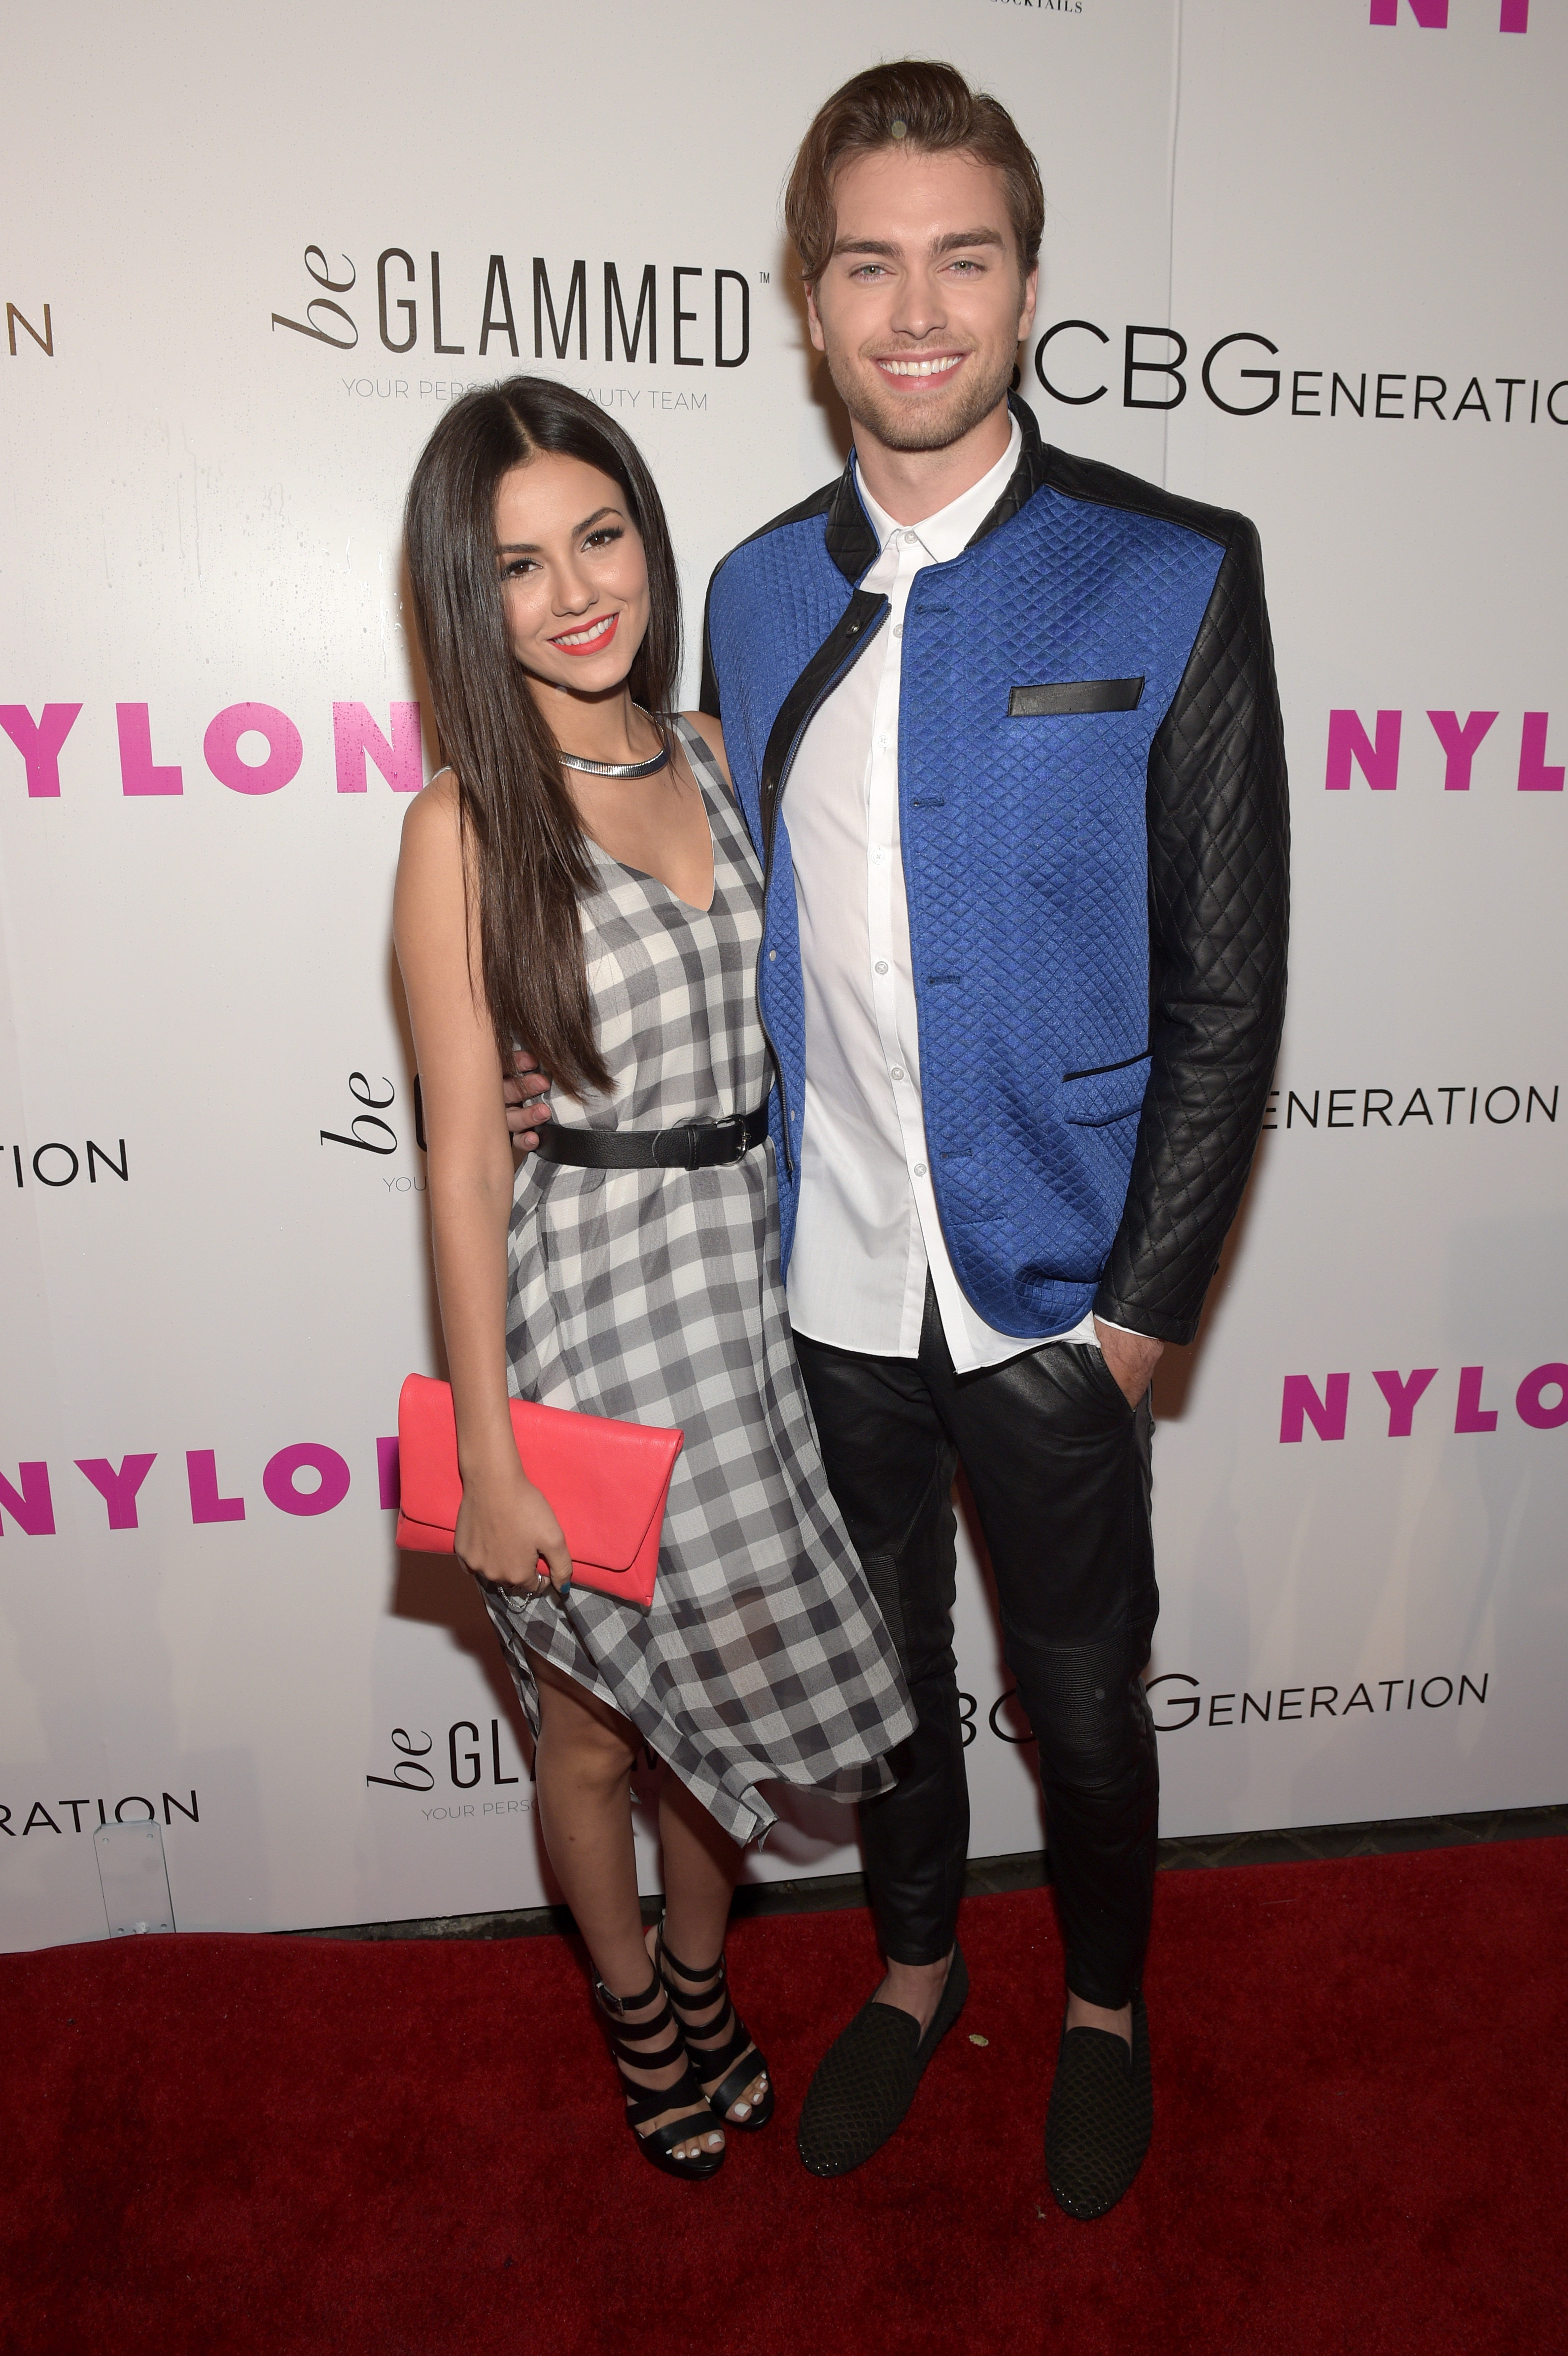 WEST HOLLYWOOD, CA - MAY 07:  Actress Victoria Justice (L) and actor Pierson Fode attend the NYLON Young Hollywood Party presented by BCBGeneration at HYDE Sunset: Kitchen + Cocktails on May 7, 2015 in West Hollywood, California.  (Photo by Jason Kempin/Getty Images for NYLON)